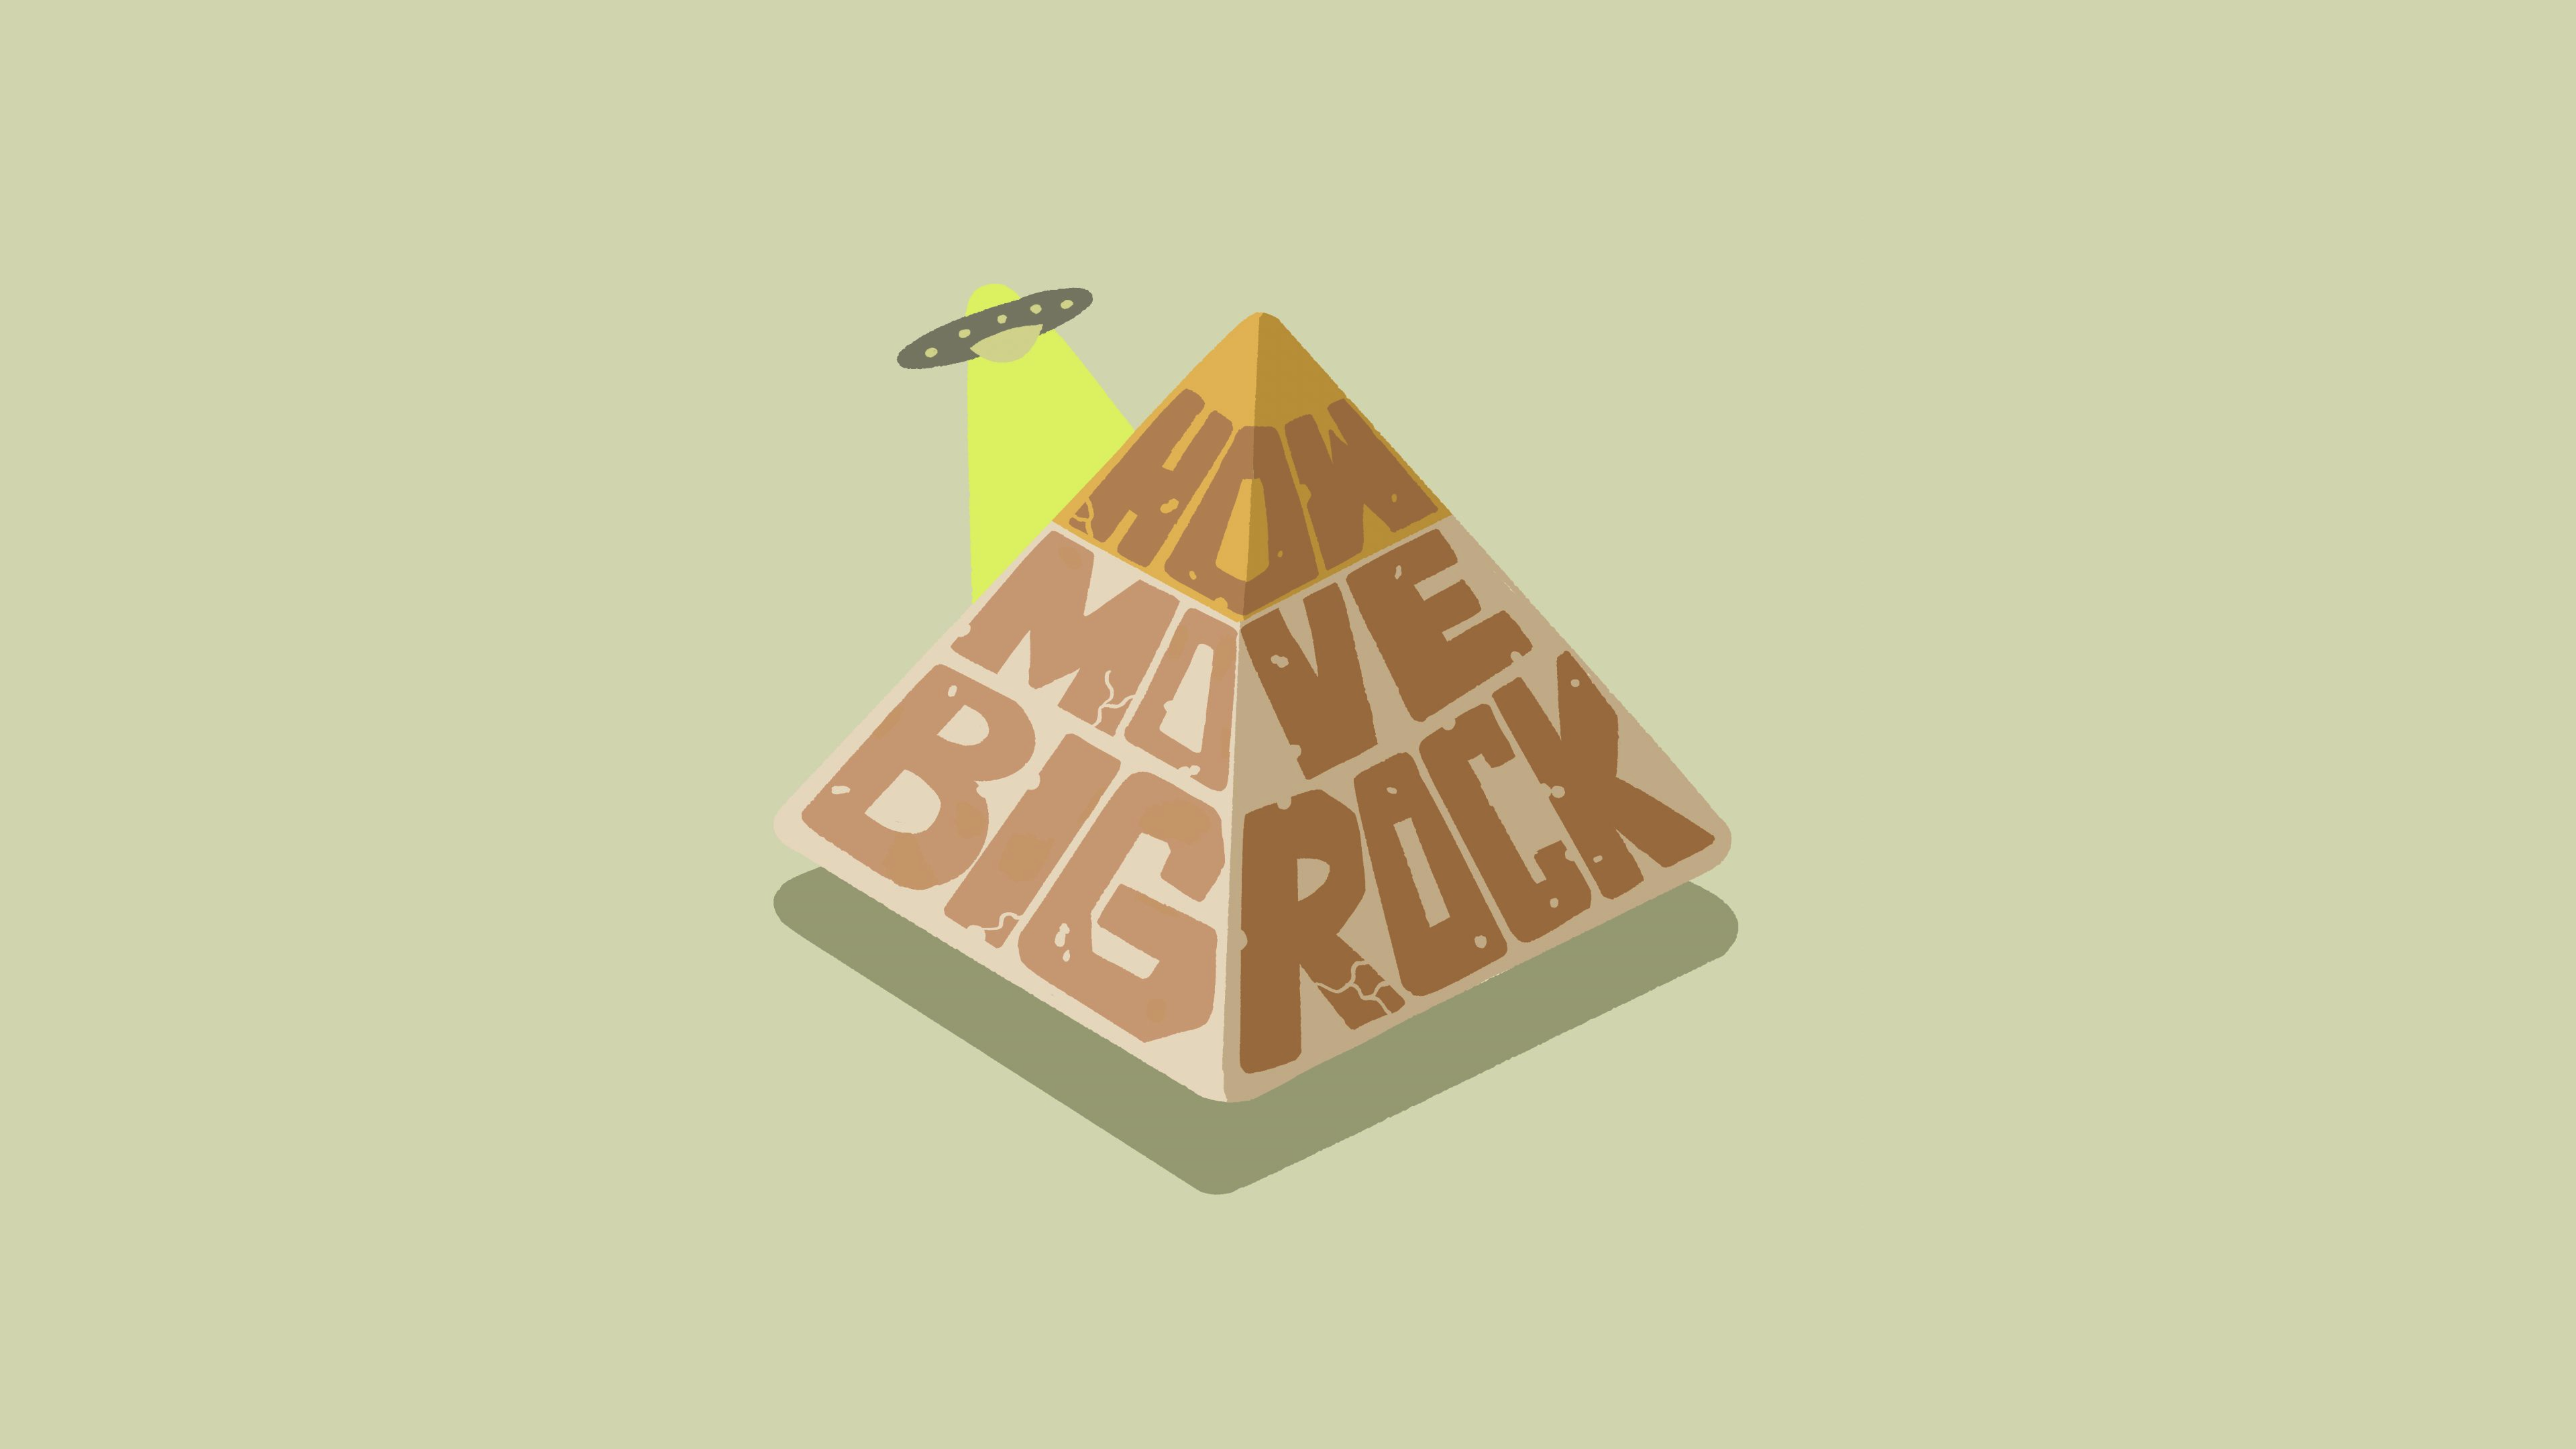 General 3840x2160 podcast pyramid UFO simple background It's Probably (Not) Aliens alien abduction Egyptian Pyramids of Giza text minimalism fan art